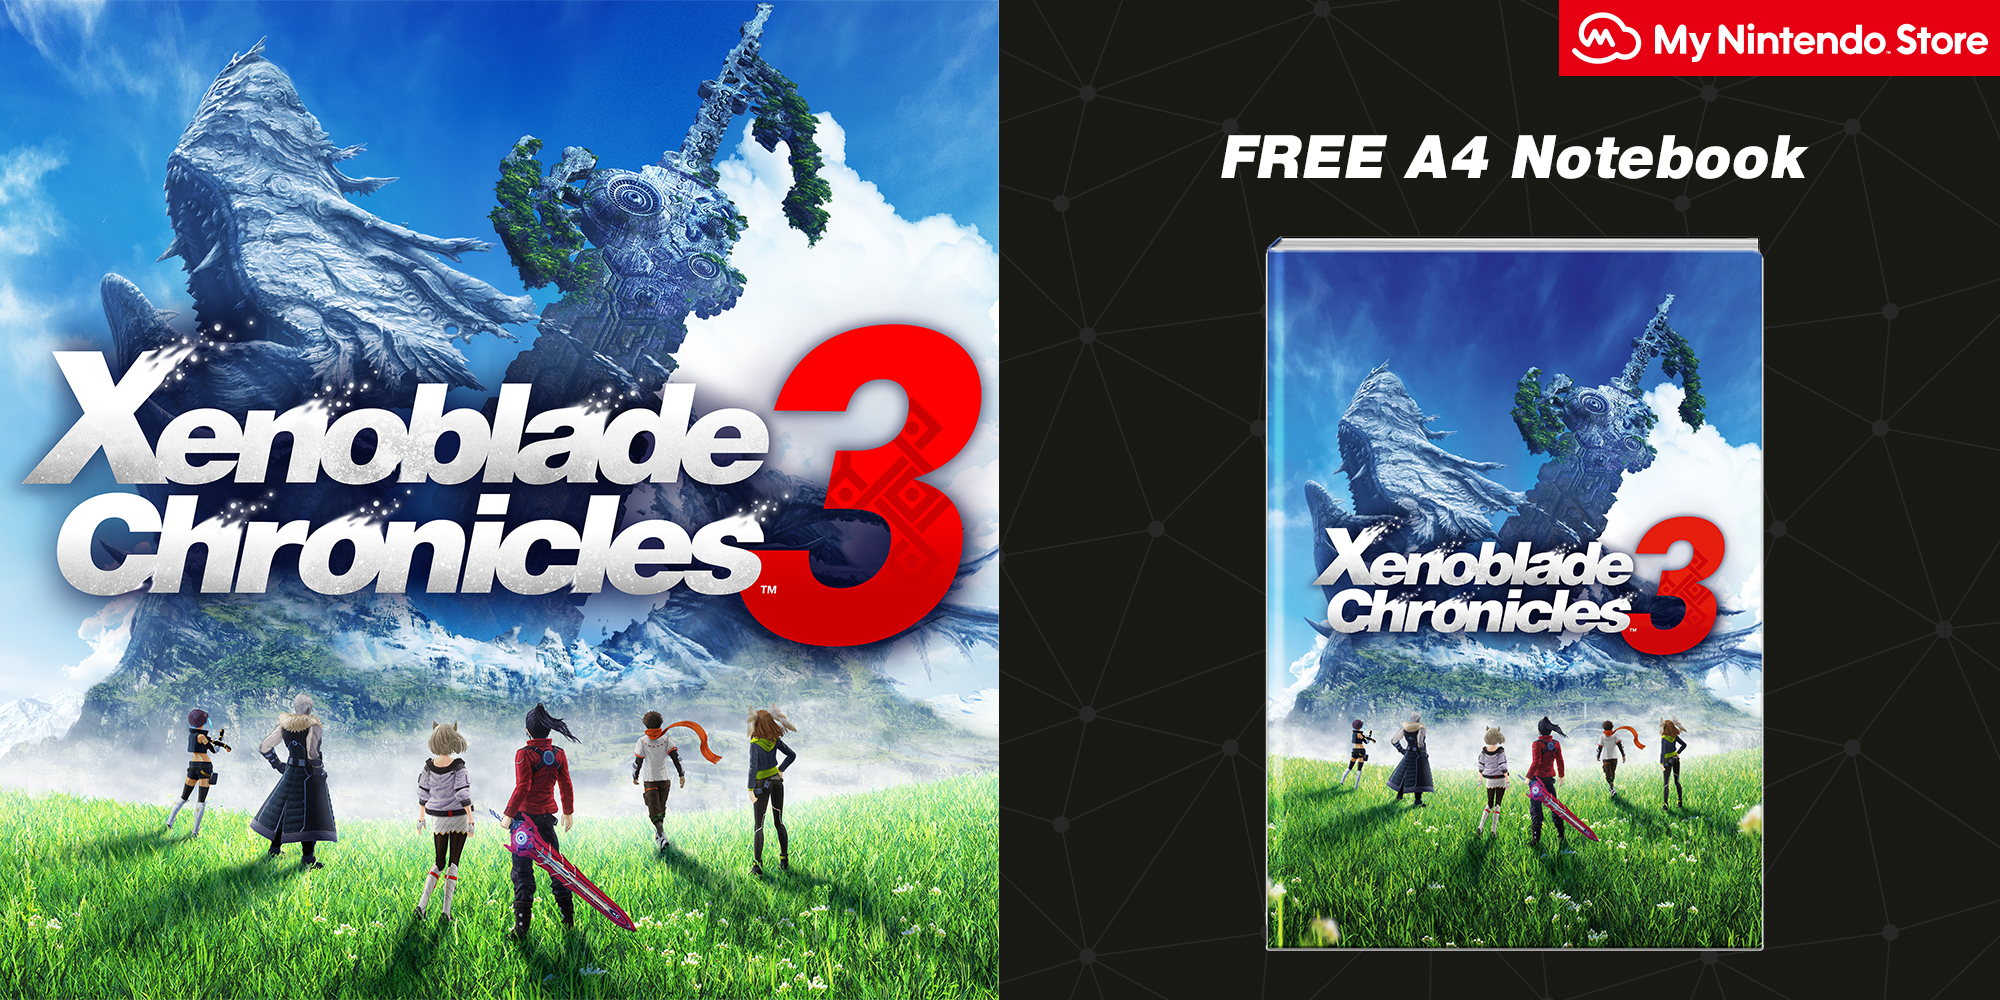 Watch it here: Xenoblade Chronicles 3 Direct in your time zone